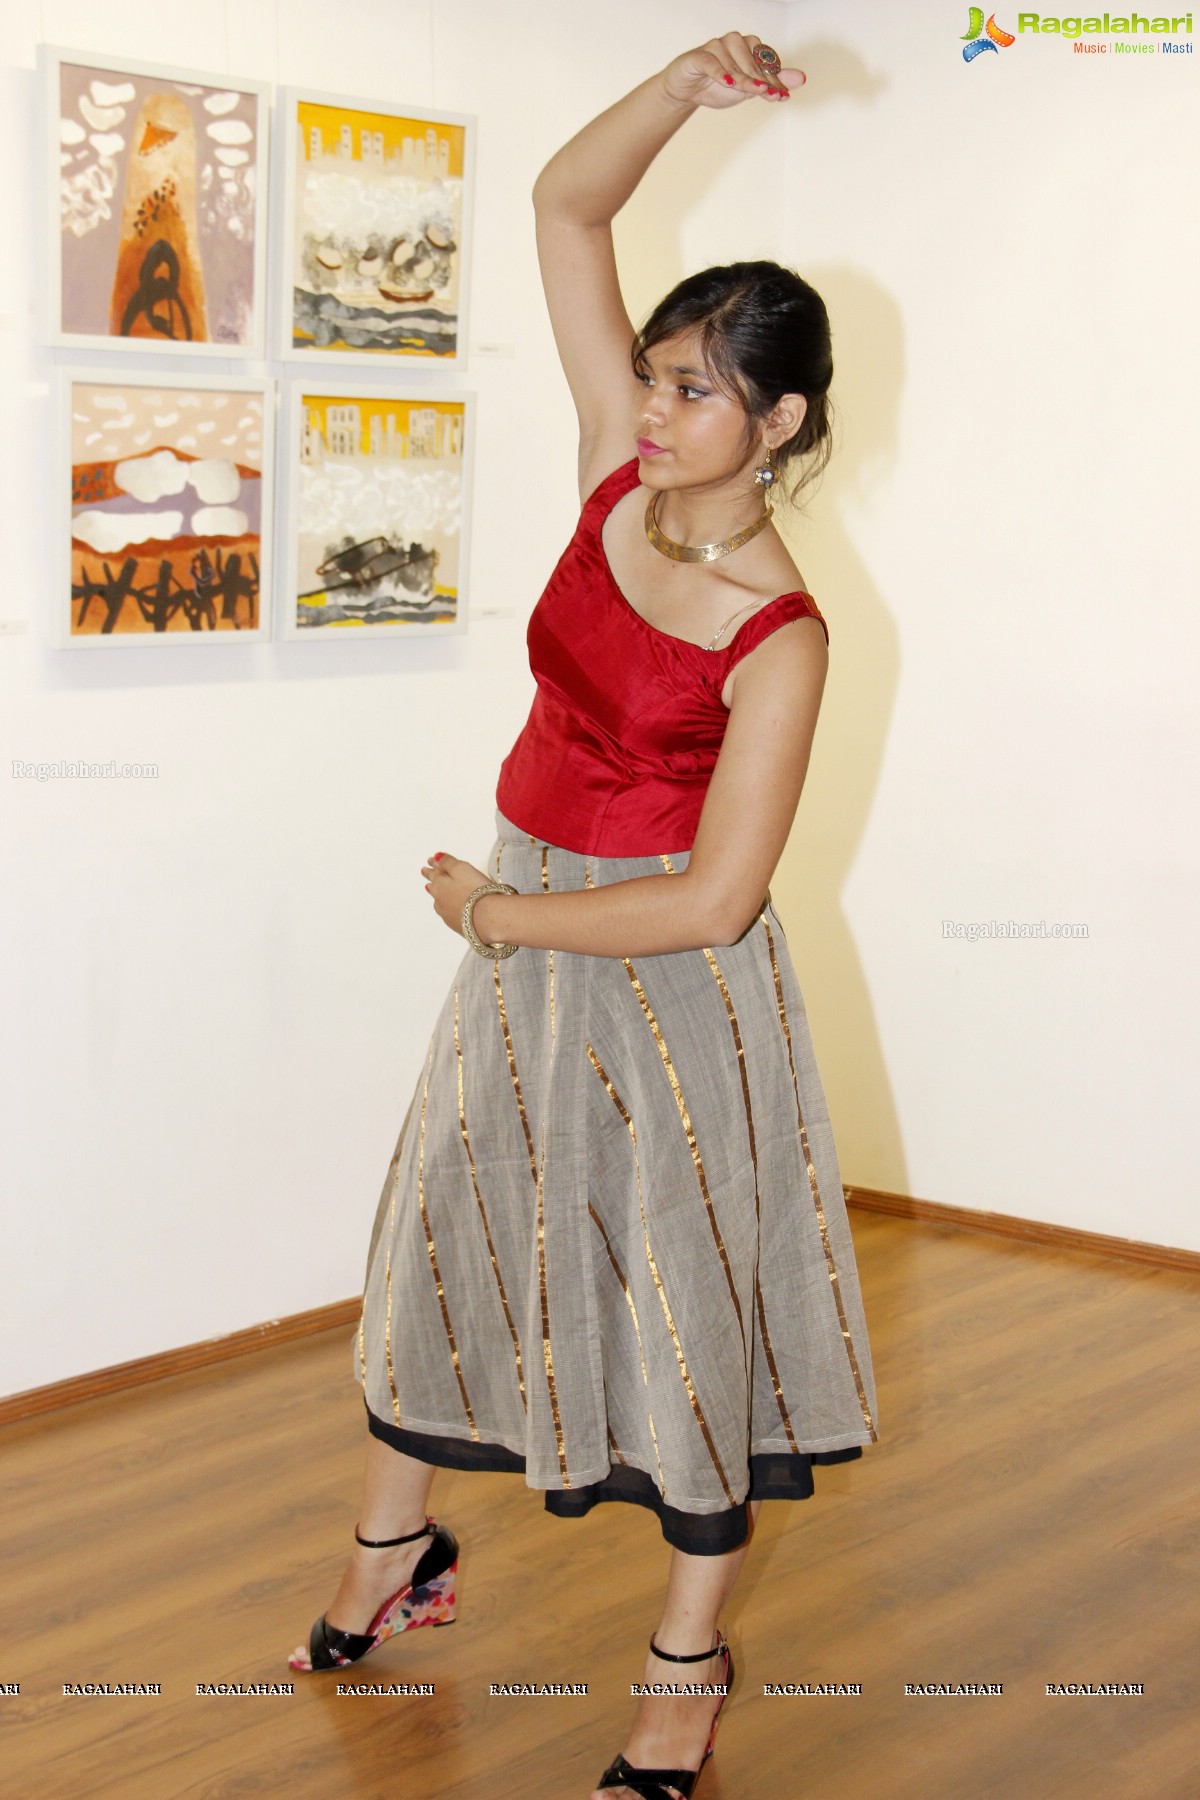 Artlooms - A Live Display of Ethnic Creations at The Gallery Cafe